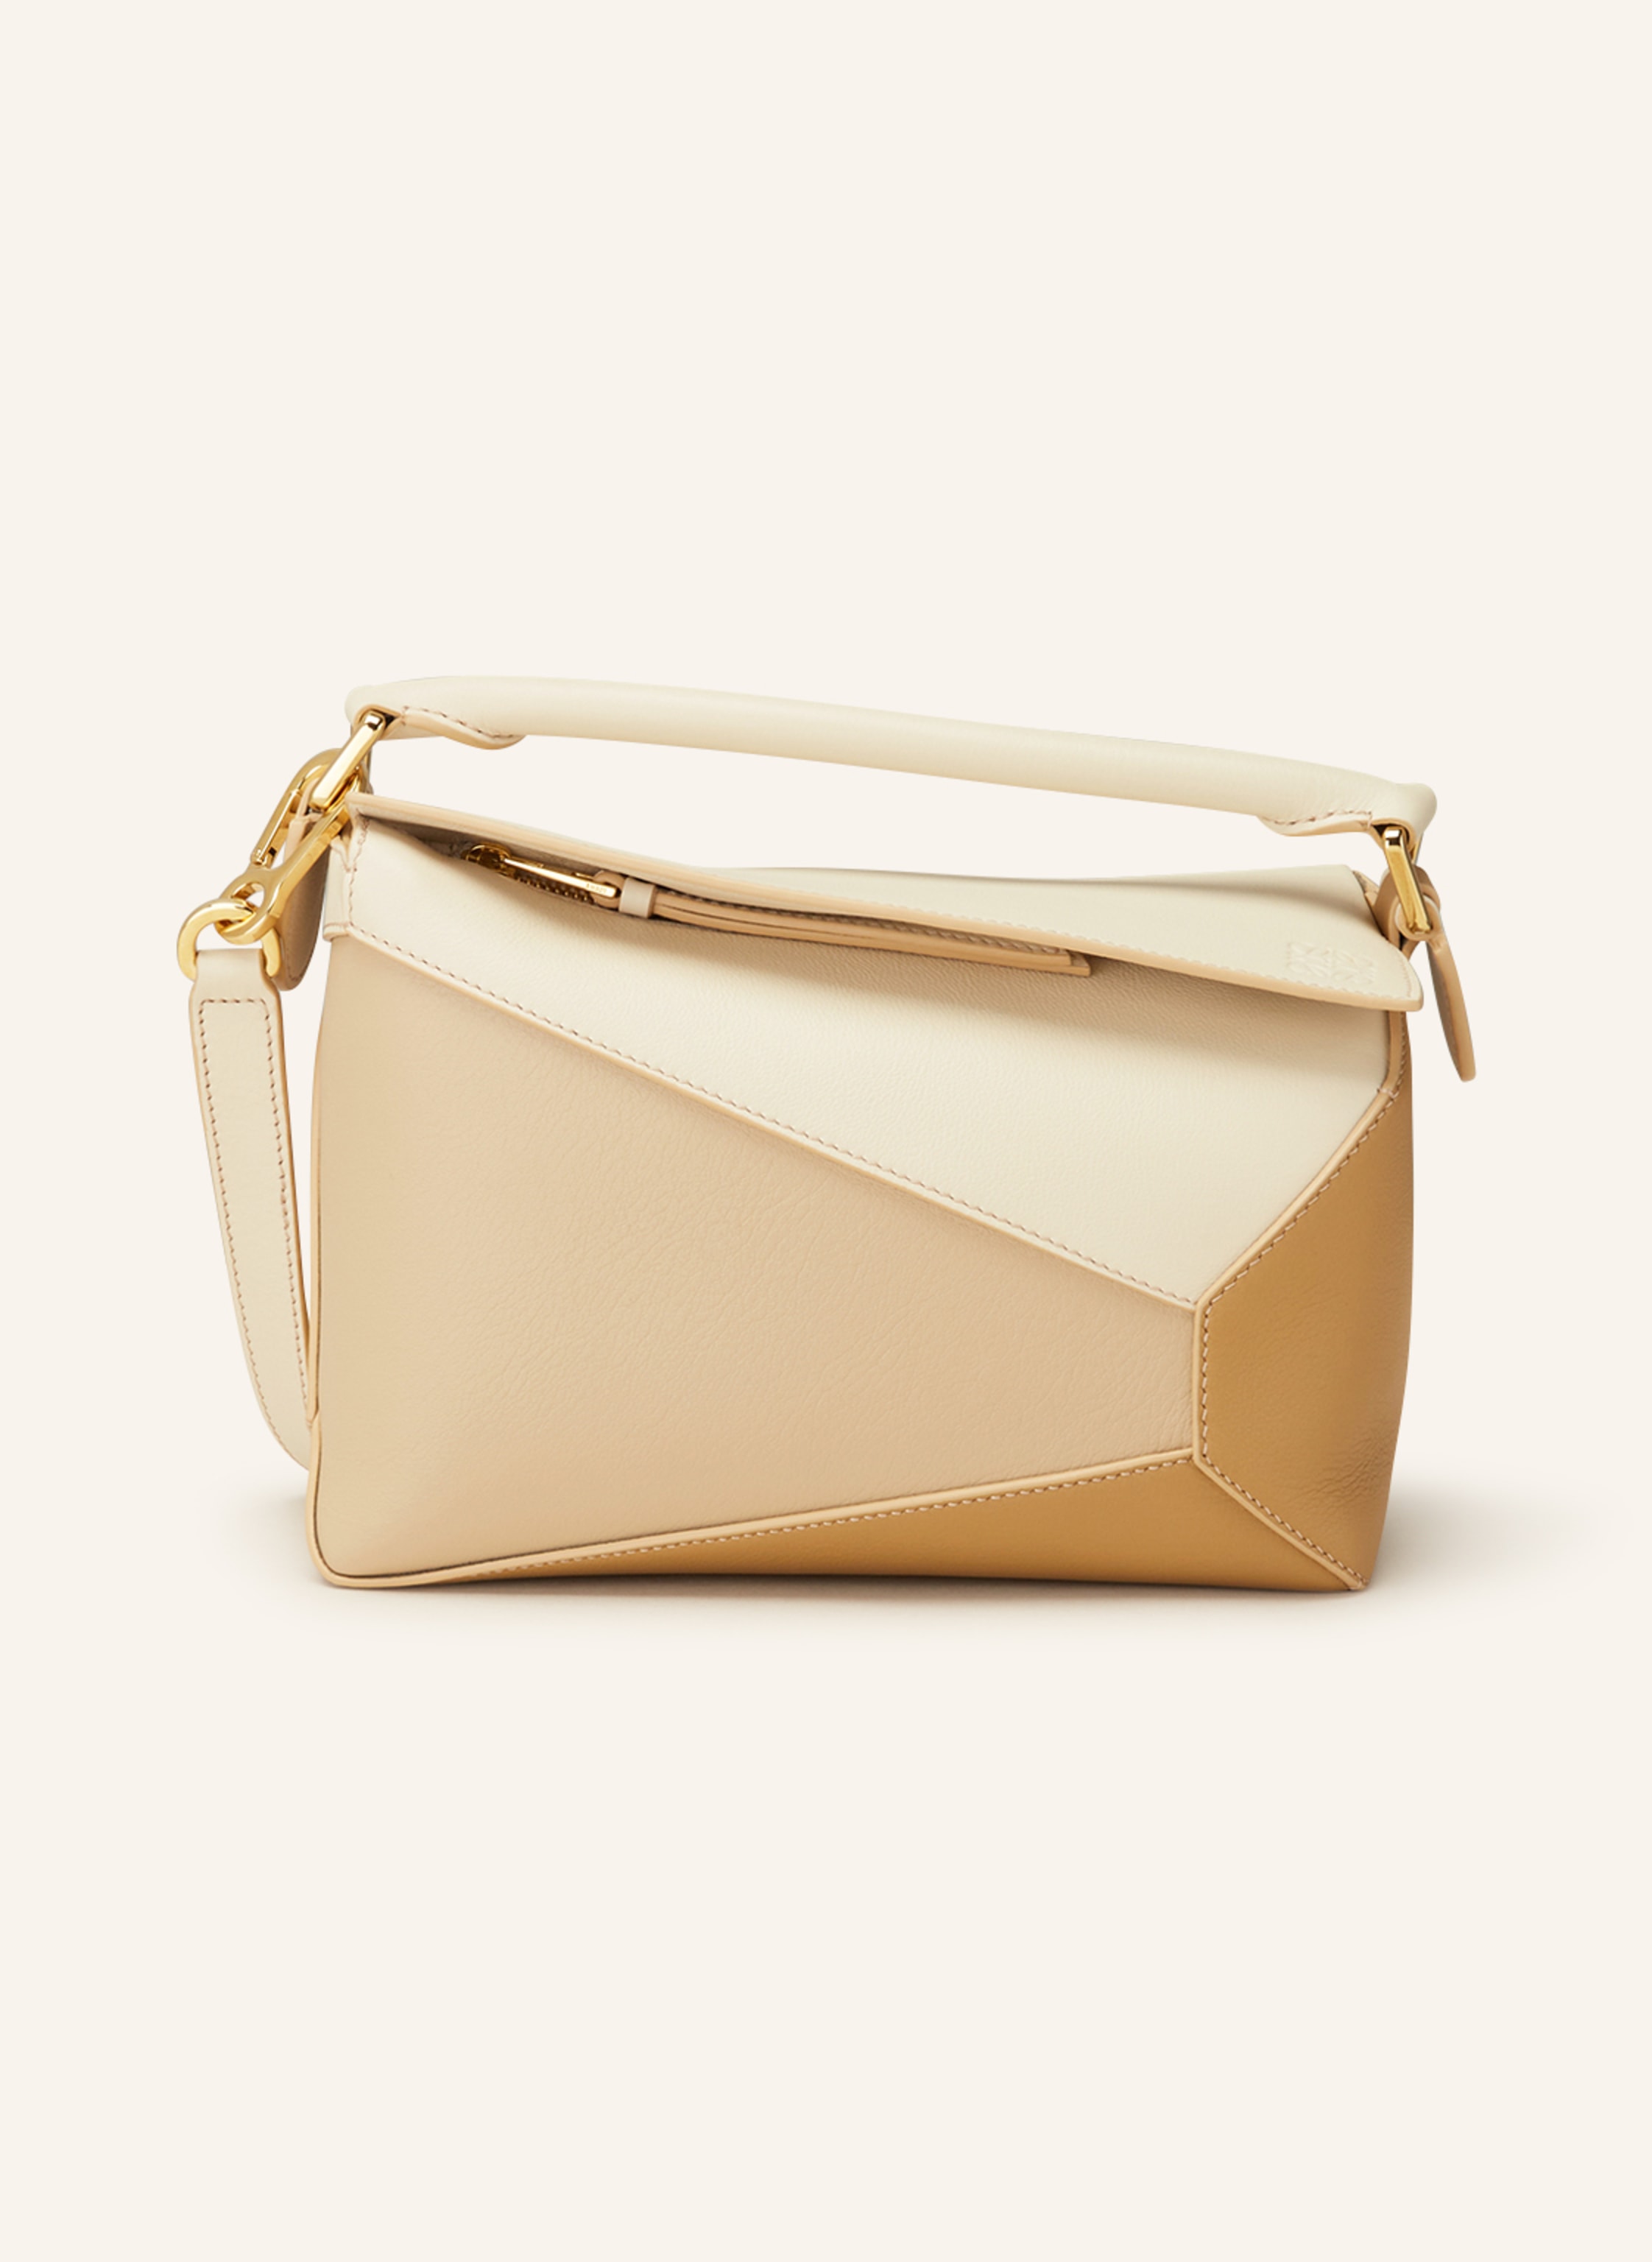 The LOEWE Puzzle Bag Review: A Sizing & Styling Guide